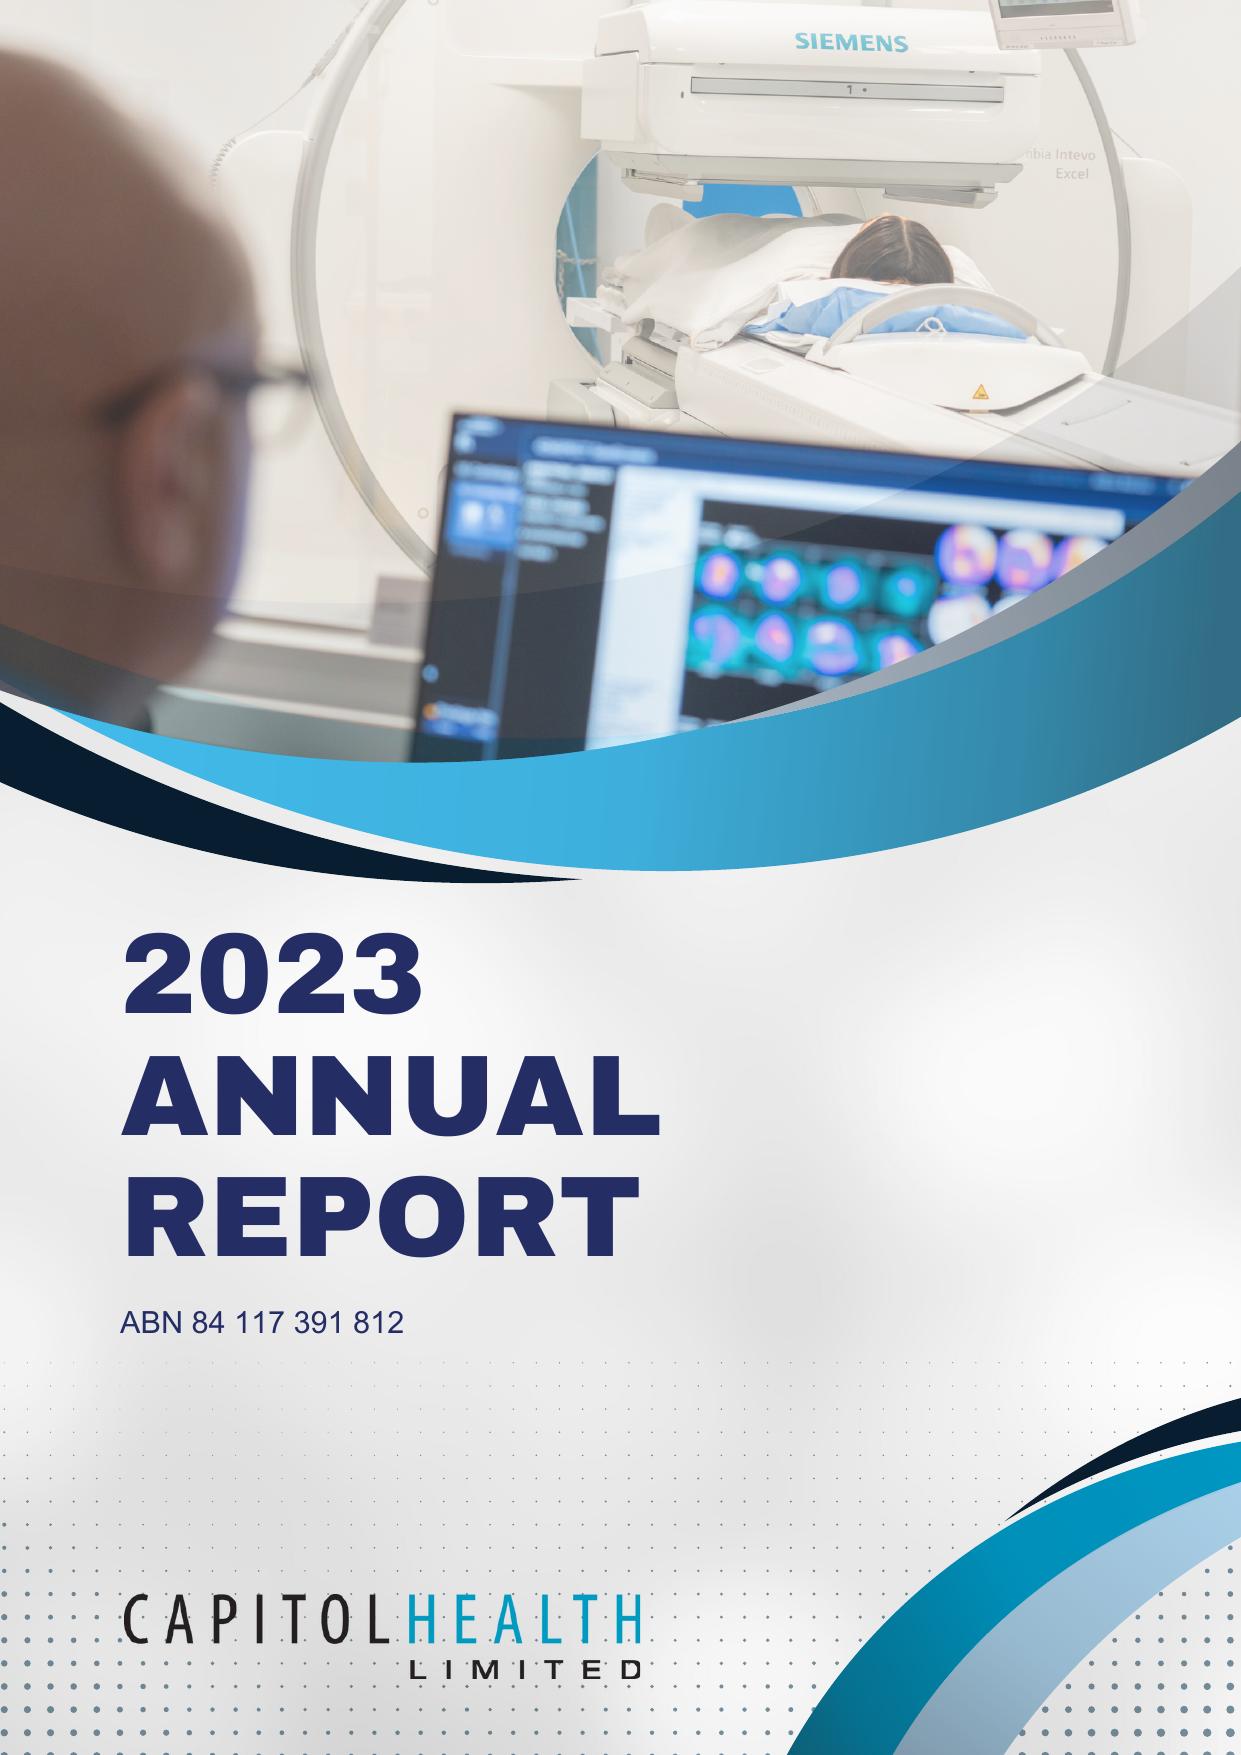 RAMSOFT 2023 Annual Report